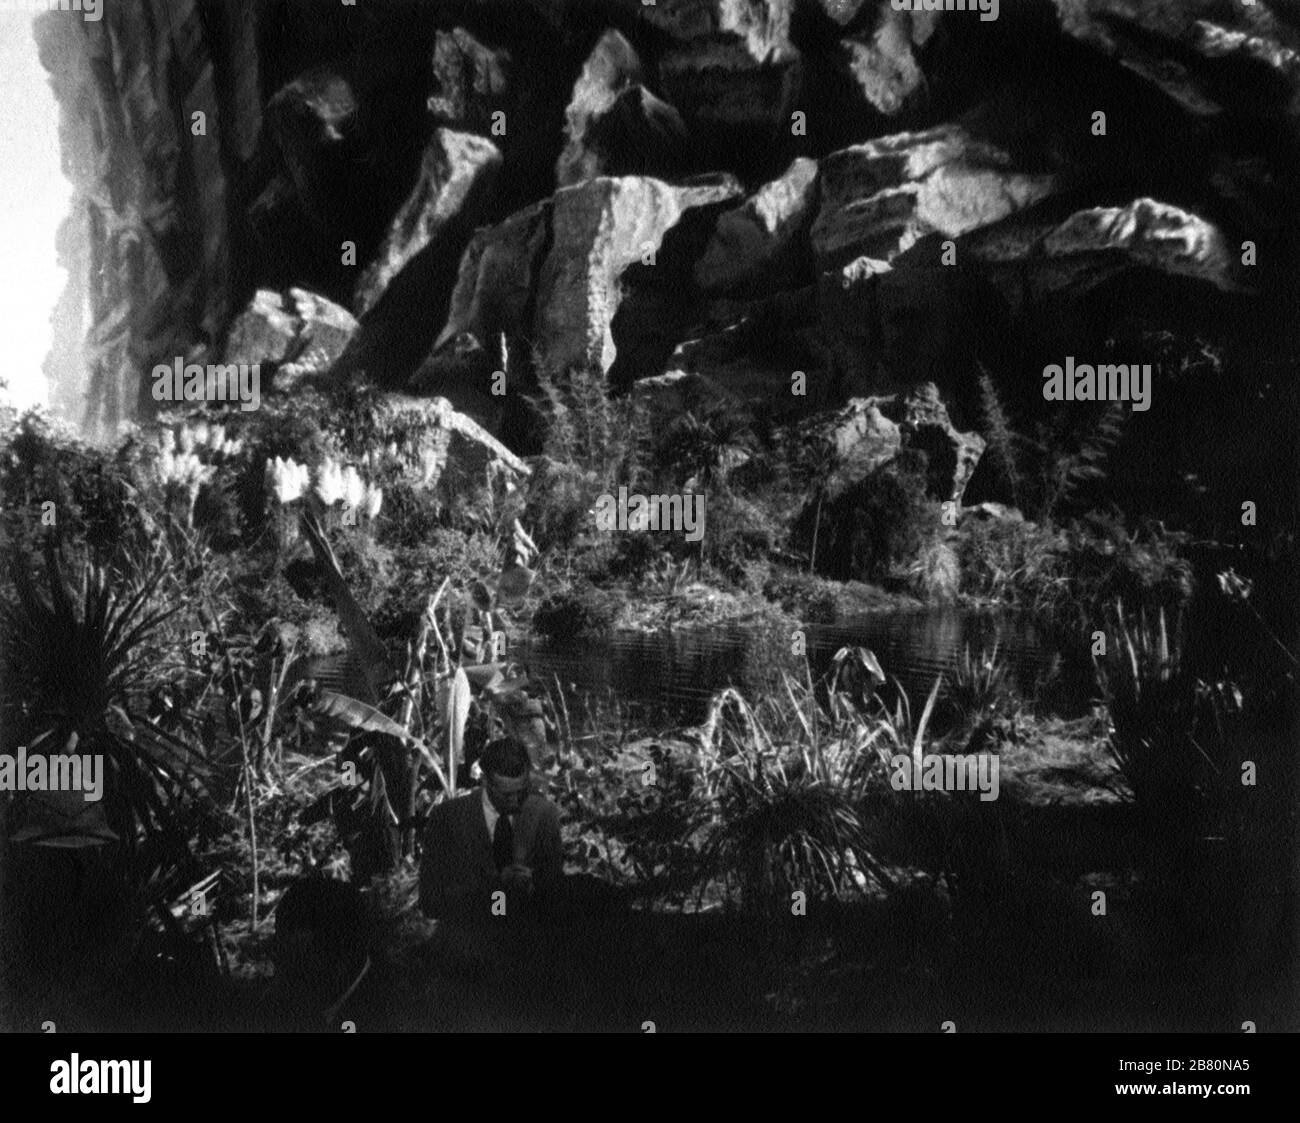 NEWCOMBE Special Effects Reference photo for background art Effects by Warren Newcombe for TARZAN AND HIS MATE 1934 Directors CEDRIC GIBBONS and JACK CONWAY characters EDGAR RICE BURROUGHS photo by TED ALLAN Metro Goldwyn Mayer Banque D'Images